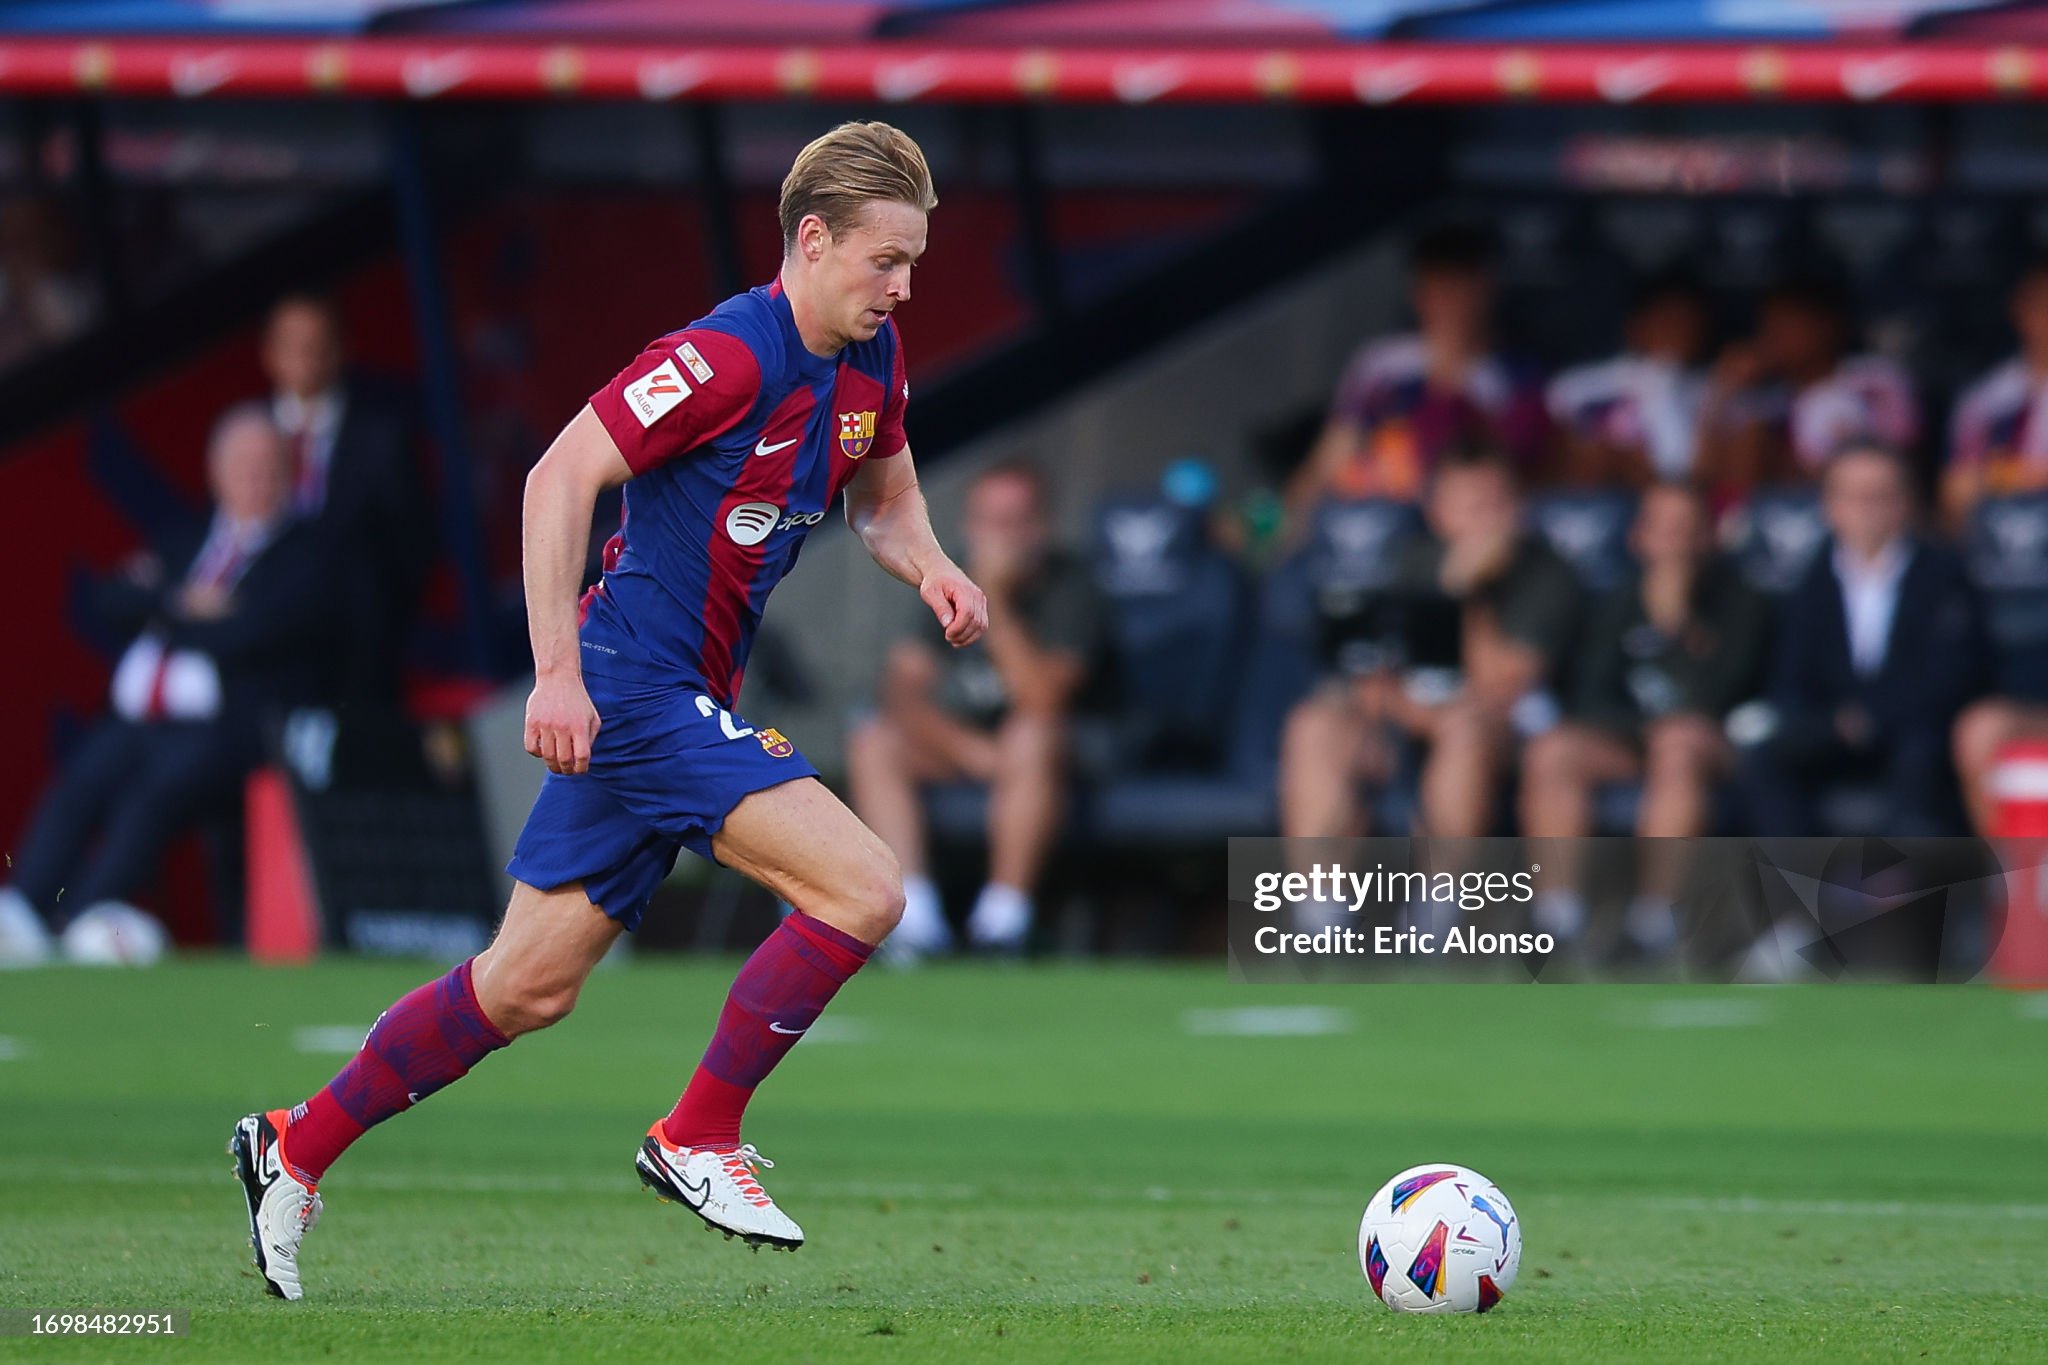 Barcelona talent shines in the absence of Frenkie de Jong and Pedri